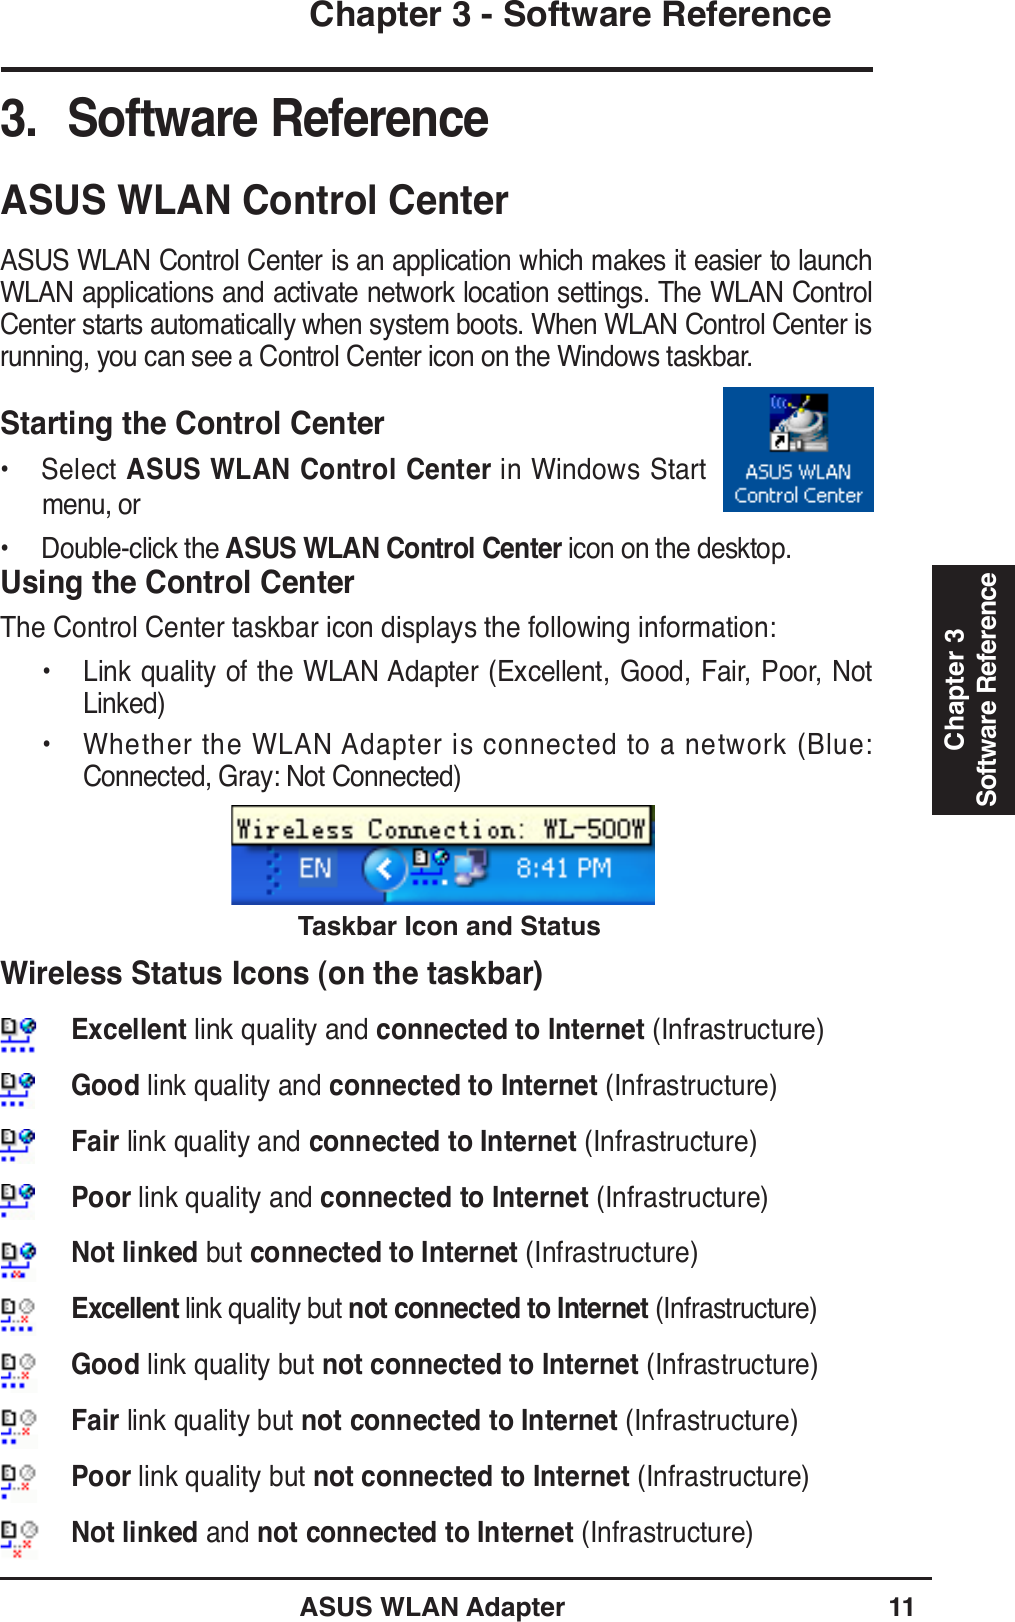 ASUS WLAN Adapter 11Chapter 3 - Software ReferenceChapter 3Software ReferenceUsing the Control CenterThe Control Center taskbar icon displays the following information:• Link quality of the WLAN Adapter (Excellent, Good, Fair, Poor, Not Linked)• Whether the WLAN Adapter is connected to a network (Blue: Connected, Gray: Not Connected)Taskbar Icon and Status Wireless Status Icons (on the taskbar)Excellent link quality and connected to Internet (Infrastructure)Good link quality and connected to Internet (Infrastructure)Fair link quality and connected to Internet (Infrastructure)Poor link quality and connected to Internet (Infrastructure)Not linked but connected to Internet (Infrastructure)Excellent link quality but not connected to Internet (Infrastructure)Good link quality but not connected to Internet (Infrastructure)Fair link quality but not connected to Internet (Infrastructure)Poor link quality but not connected to Internet (Infrastructure)Not linked and not connected to Internet (Infrastructure)ASUS WLAN Control CenterASUS WLAN Control Center is an application which makes it easier to launch WLAN applications and activate network location settings. The WLAN Control Center starts automatically when system boots. When WLAN Control Center is running, you can see a Control Center icon on the Windows taskbar.Starting the Control Center• Select ASUS WLAN Control Center in Windows Start menu, or• Double-click the ASUS WLAN Control Center icon on the desktop.3. Software Reference